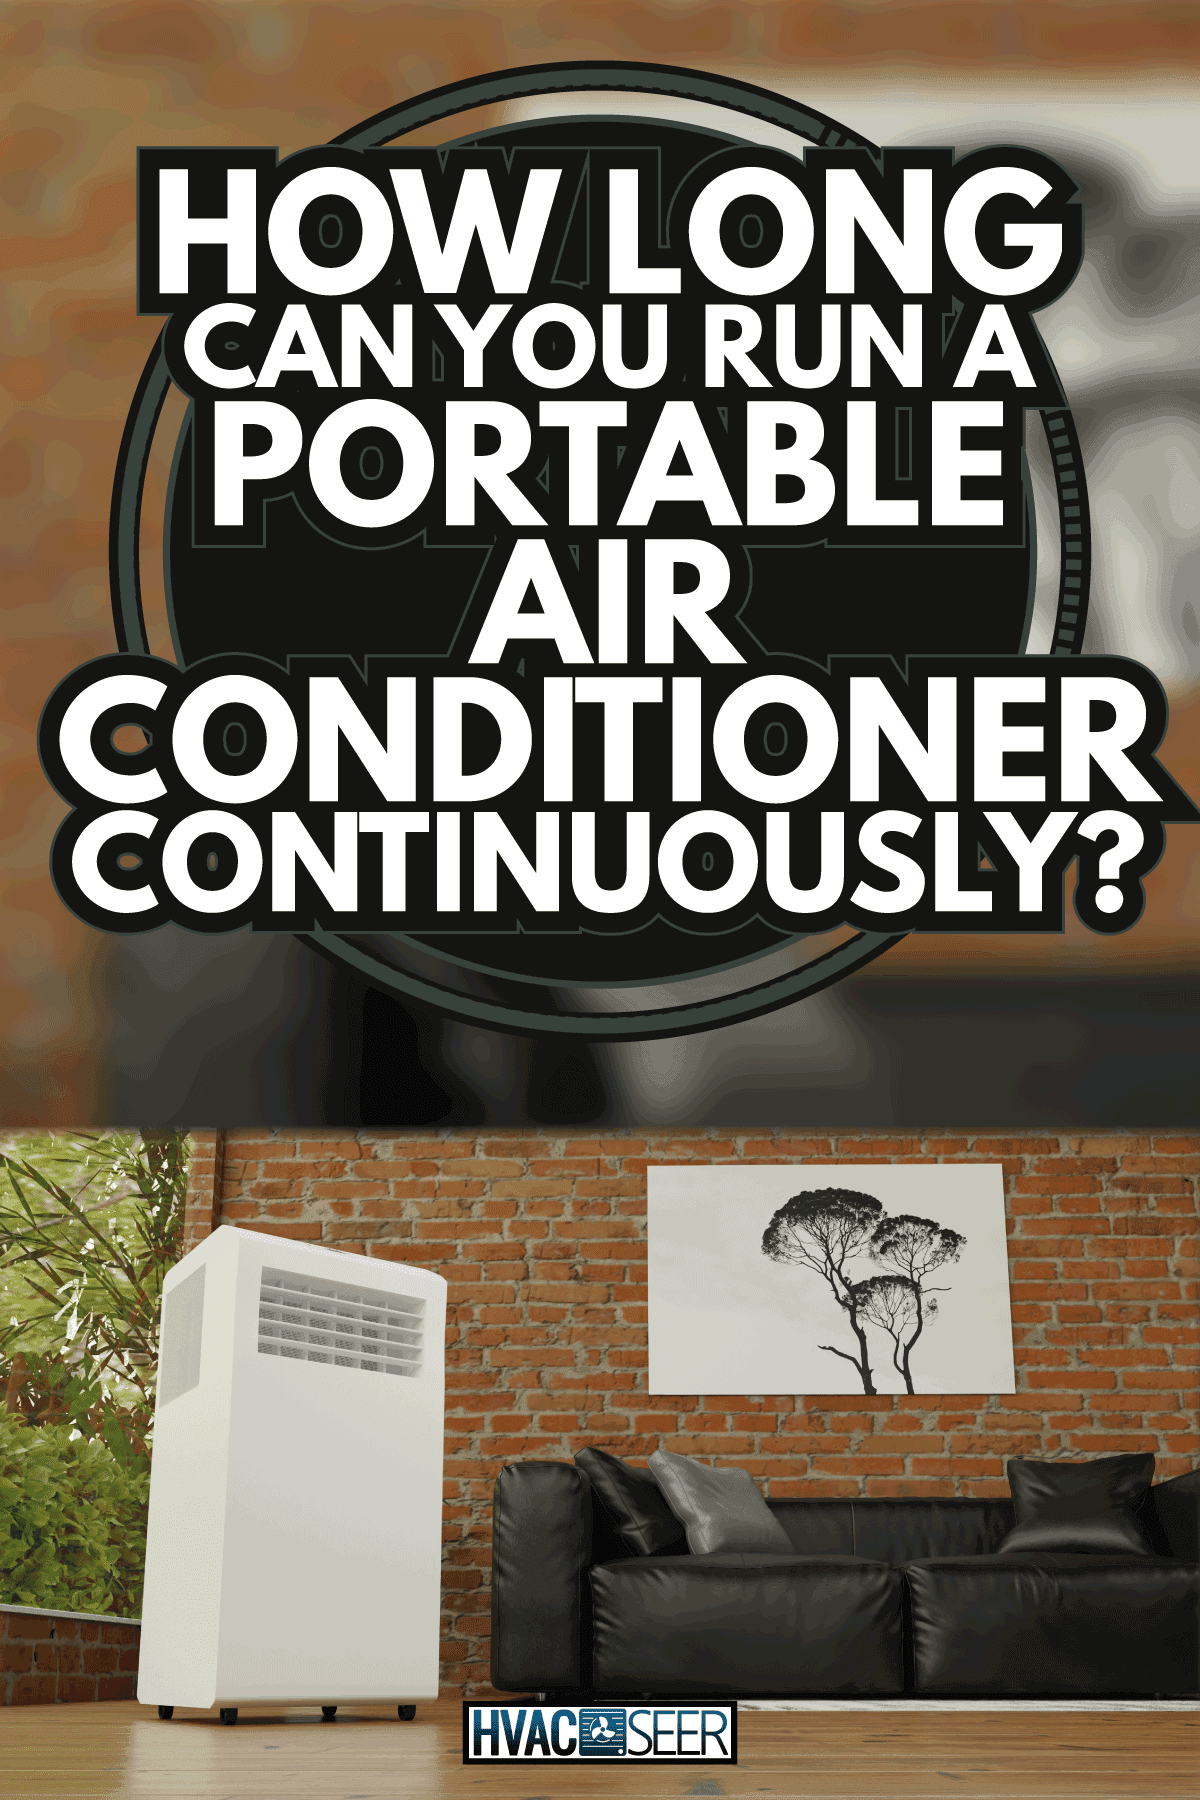 mobile air conditioner inside a brick walled living room. How Long Can You Run A Portable Air Conditioner Continuously